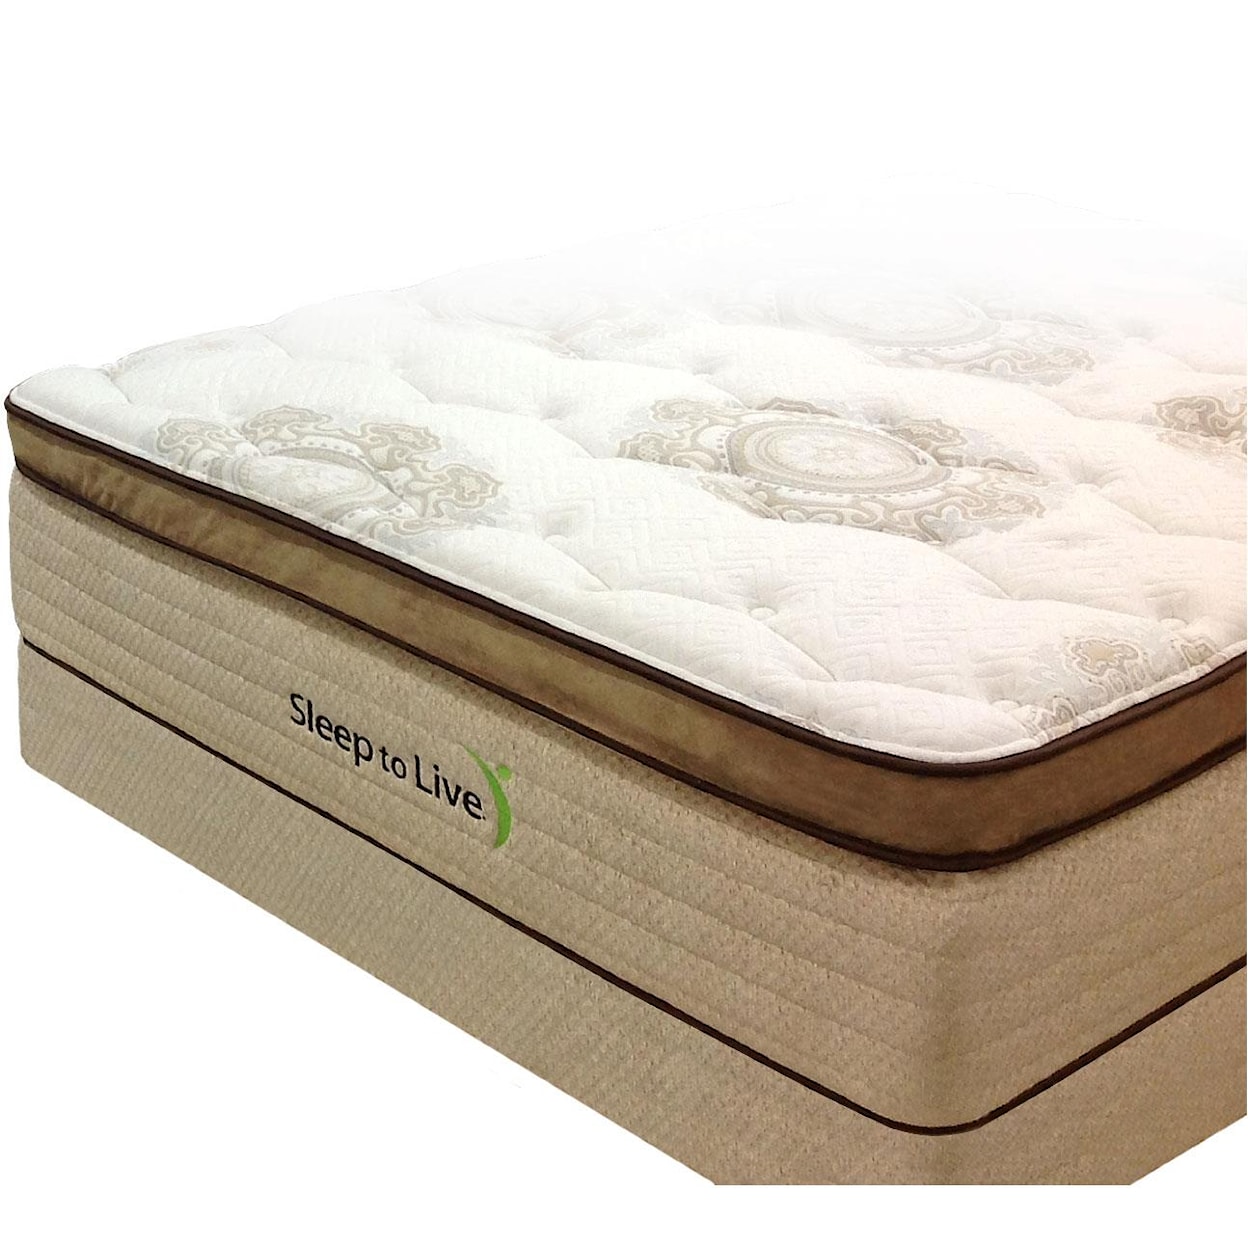 Kingsdown Body System 2 Queen Pocketed Coil Mattress